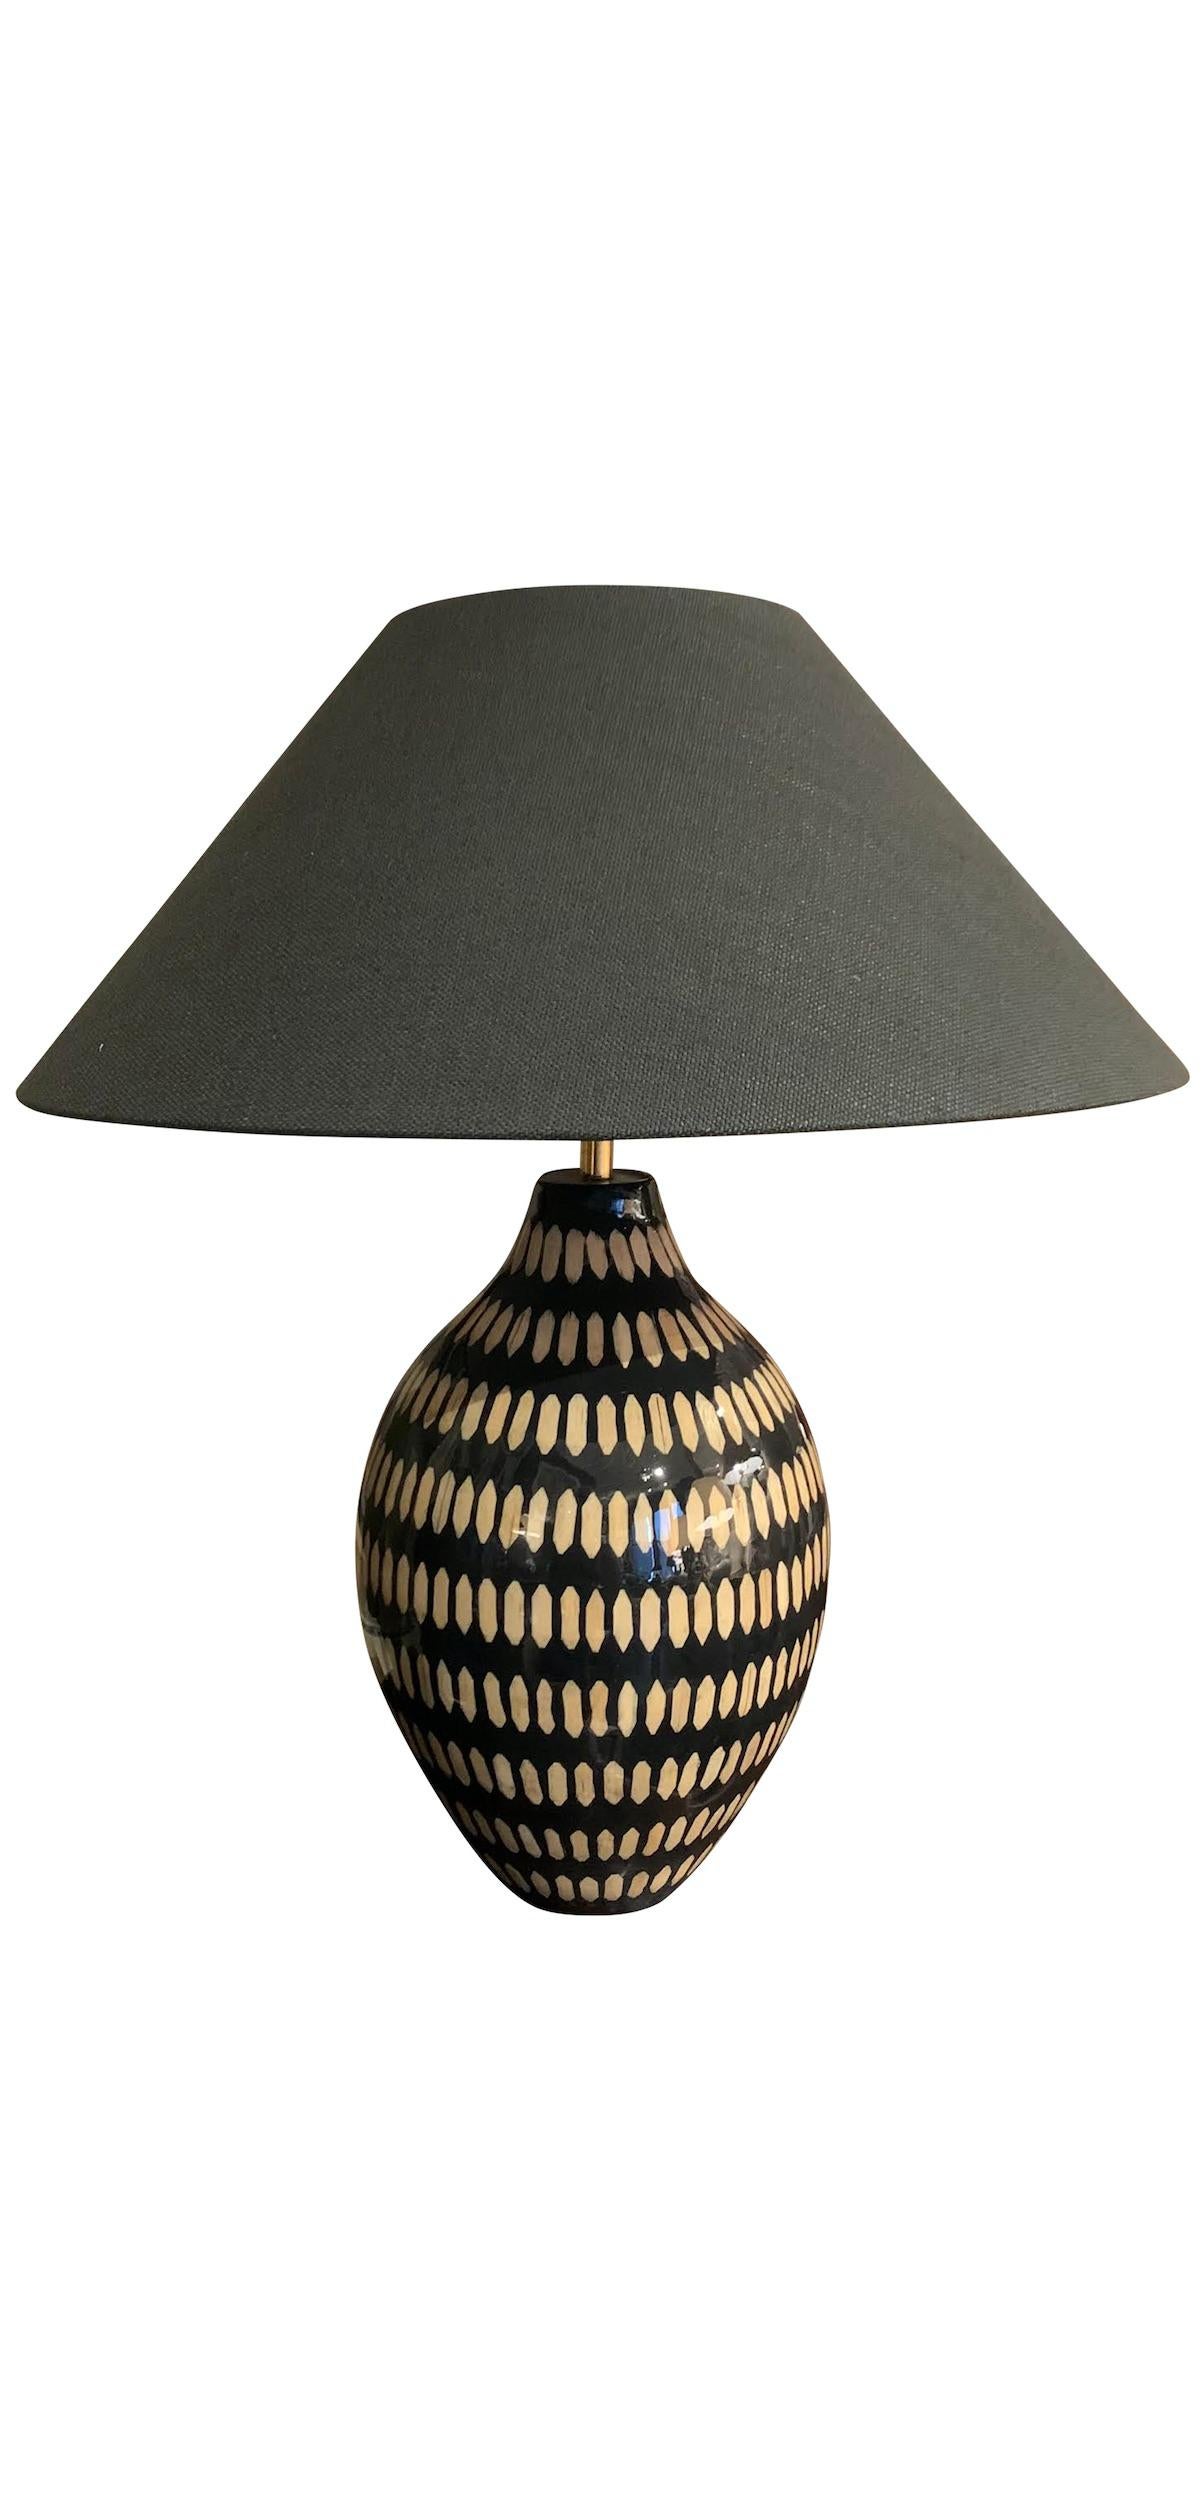 Contemporary Chinese pair of lacquered bamboo lamps.
Black ground with cream vertical dash design.
Base measures 10